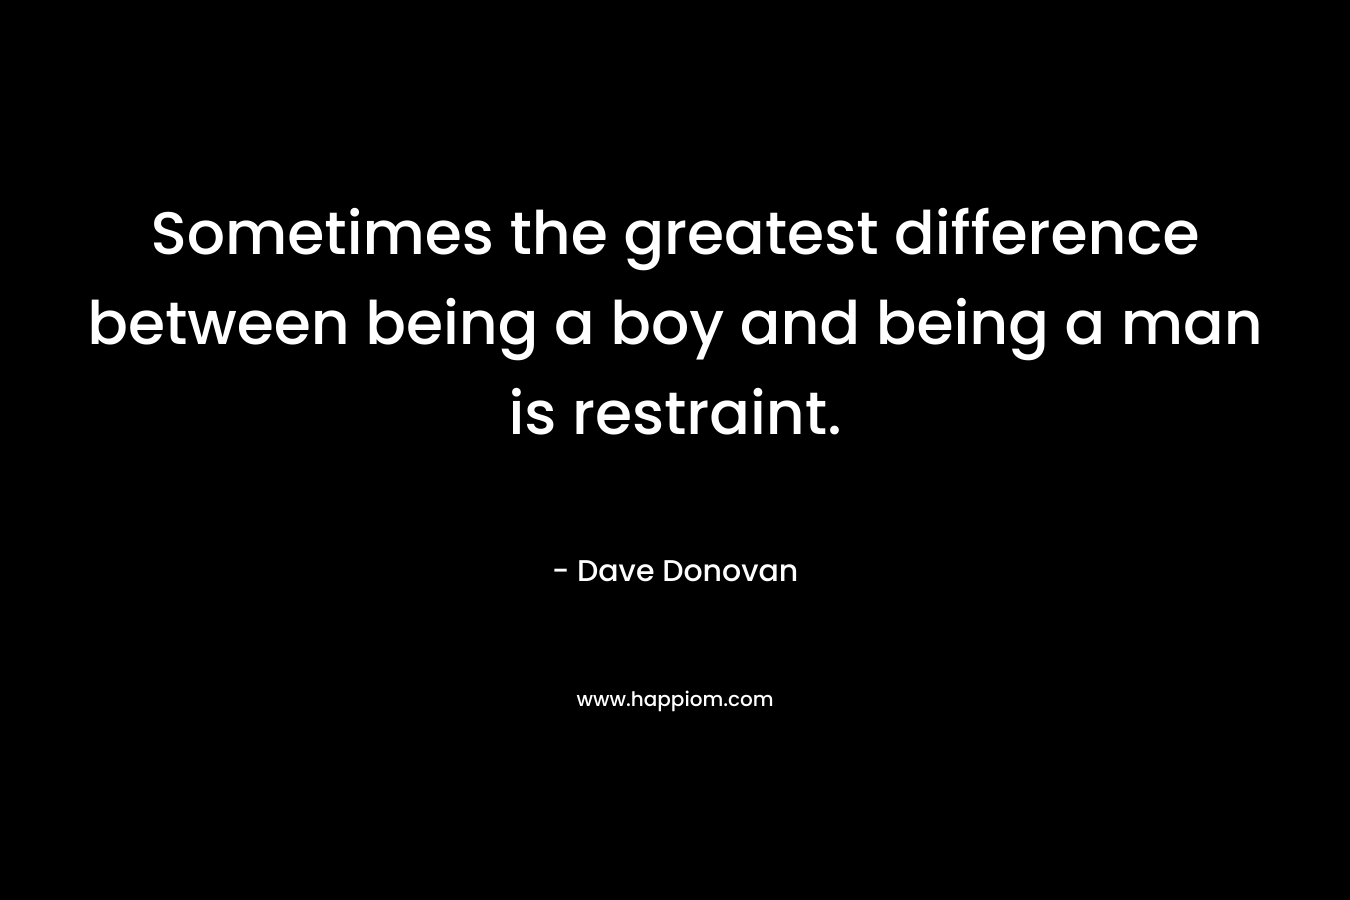 Sometimes the greatest difference between being a boy and being a man is restraint. – Dave Donovan